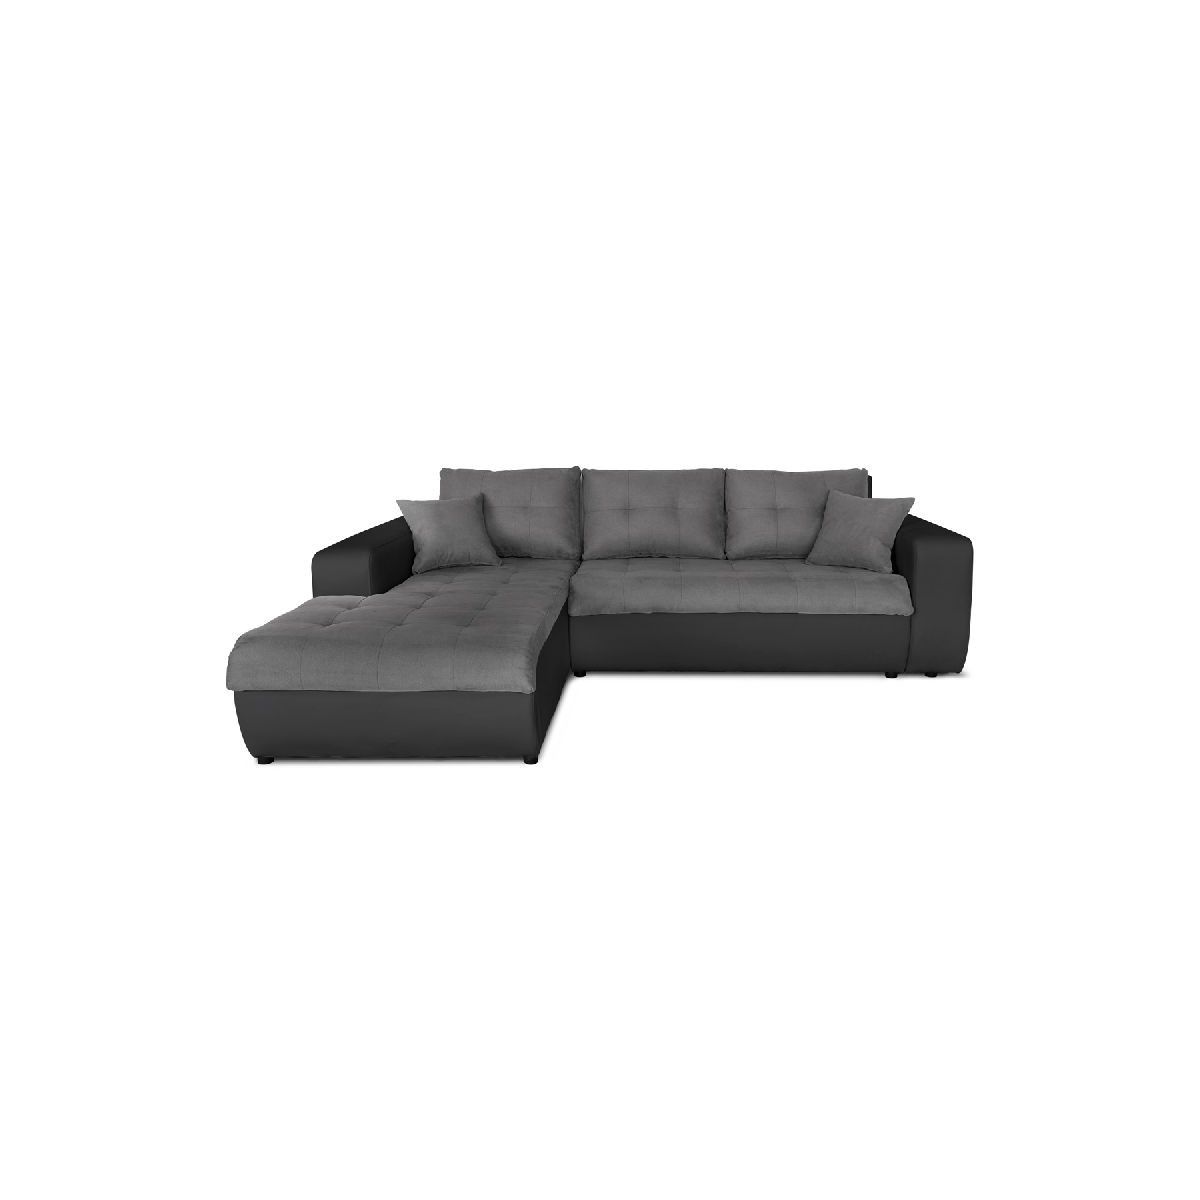 Convertible Corner Sofa 4 Places Imitation And Microfiber Left Corner Bond  (grey, Black) – Amp Story 8795 With Regard To 8 Seat Convertible Sofas (View 3 of 15)